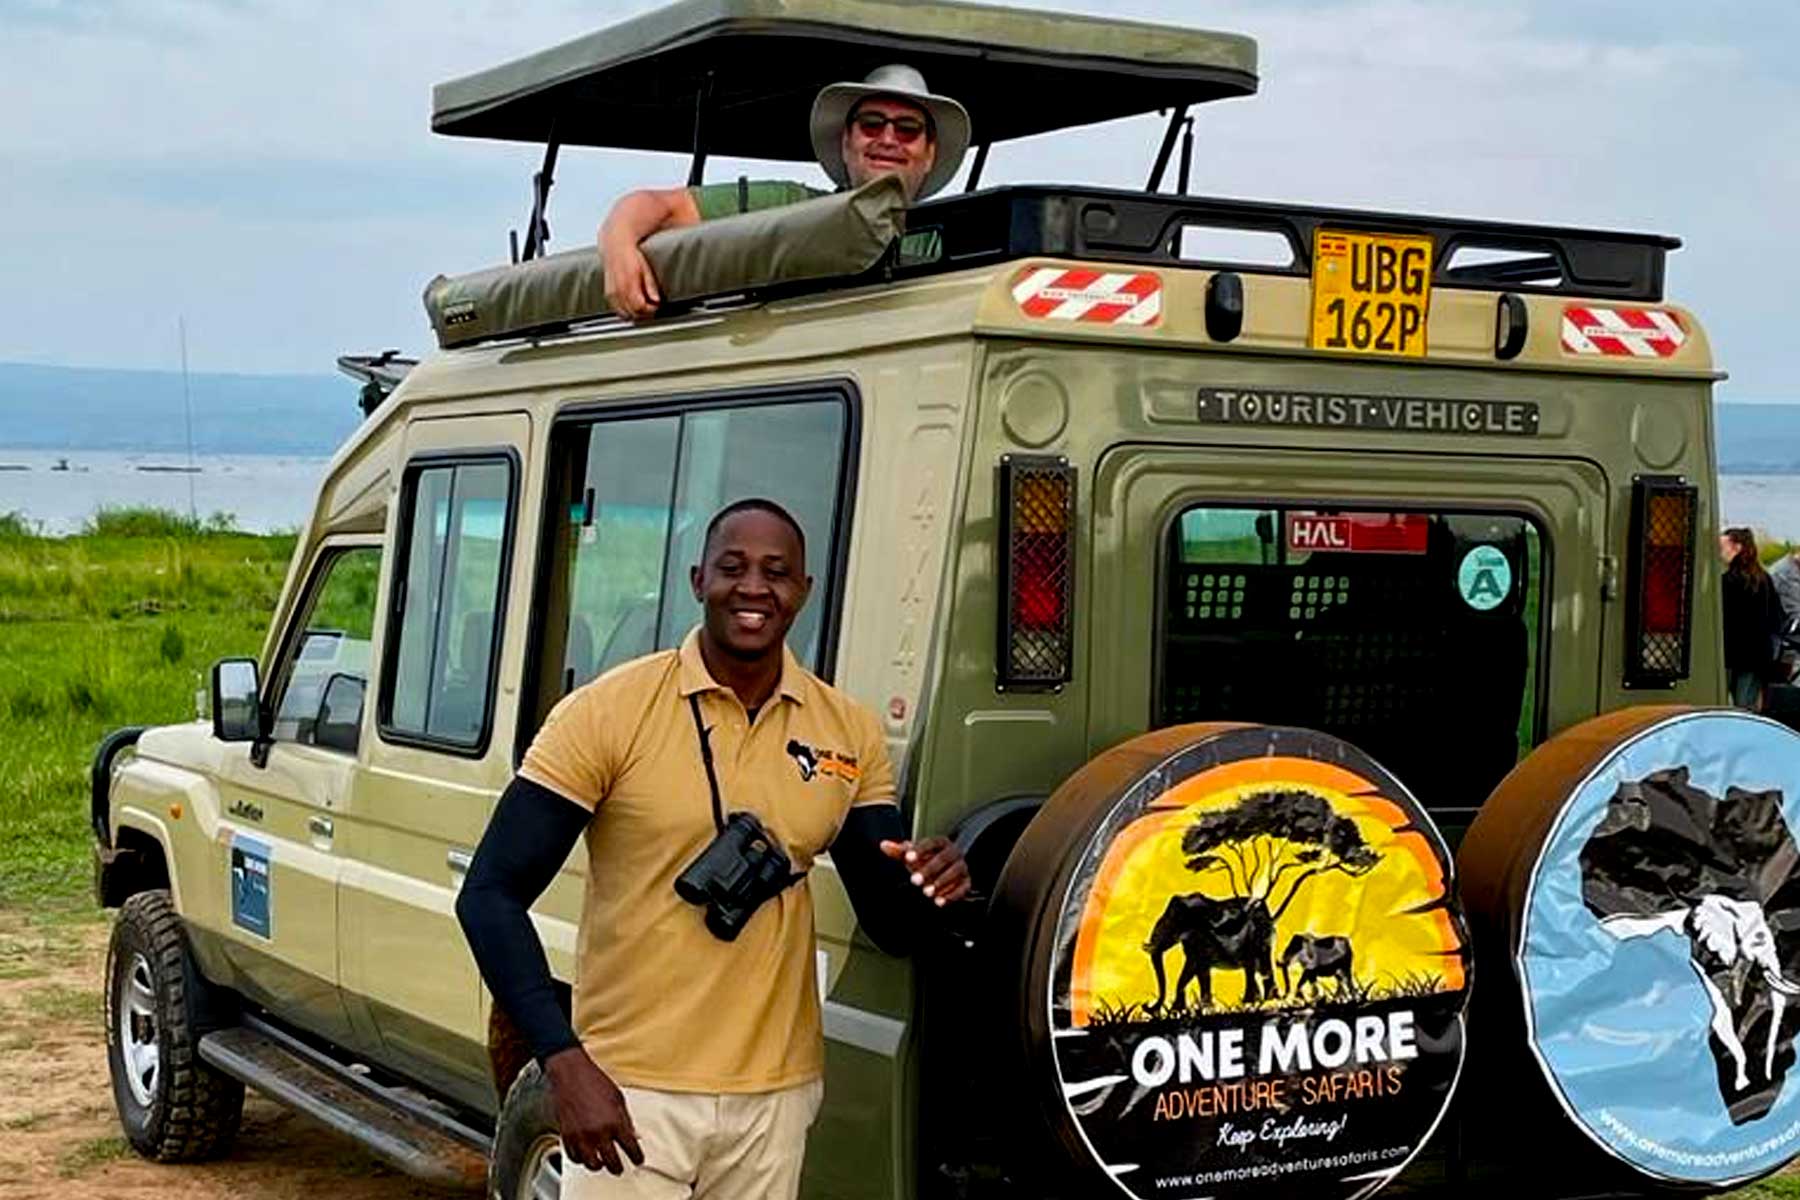 Why book with One More Adventure Safaris?